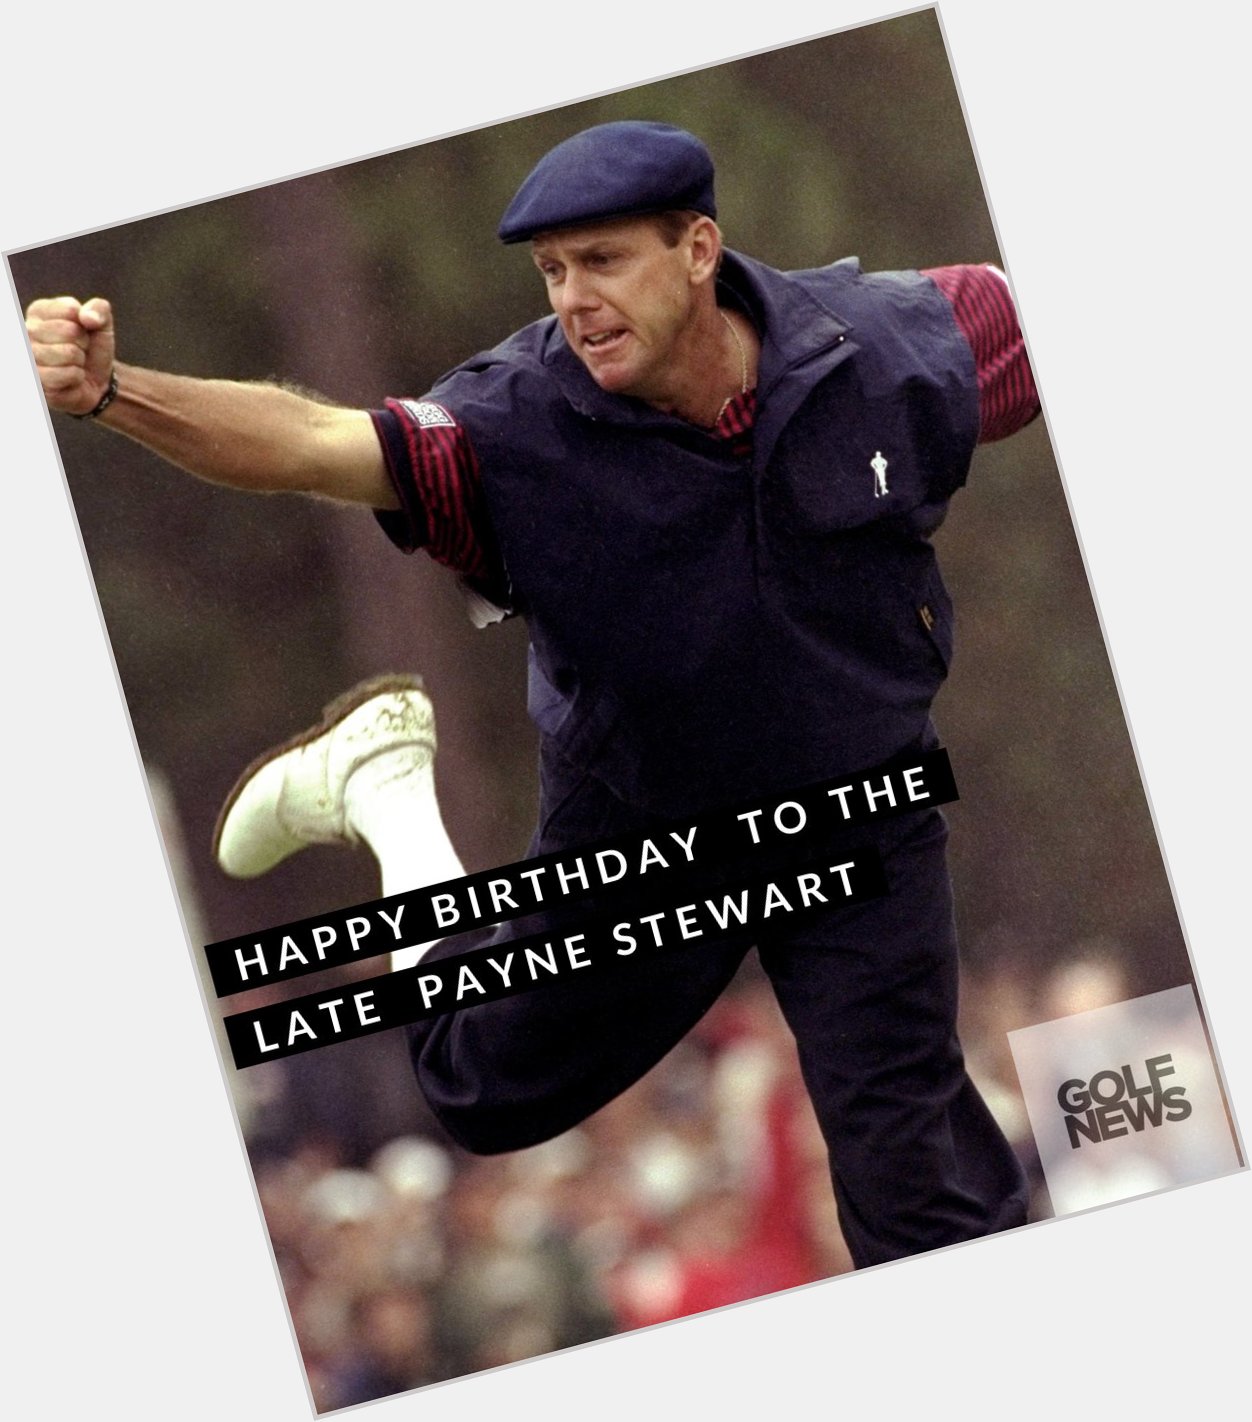 Happy birthday to the late Payne Stewart, who would have been 64 today. 